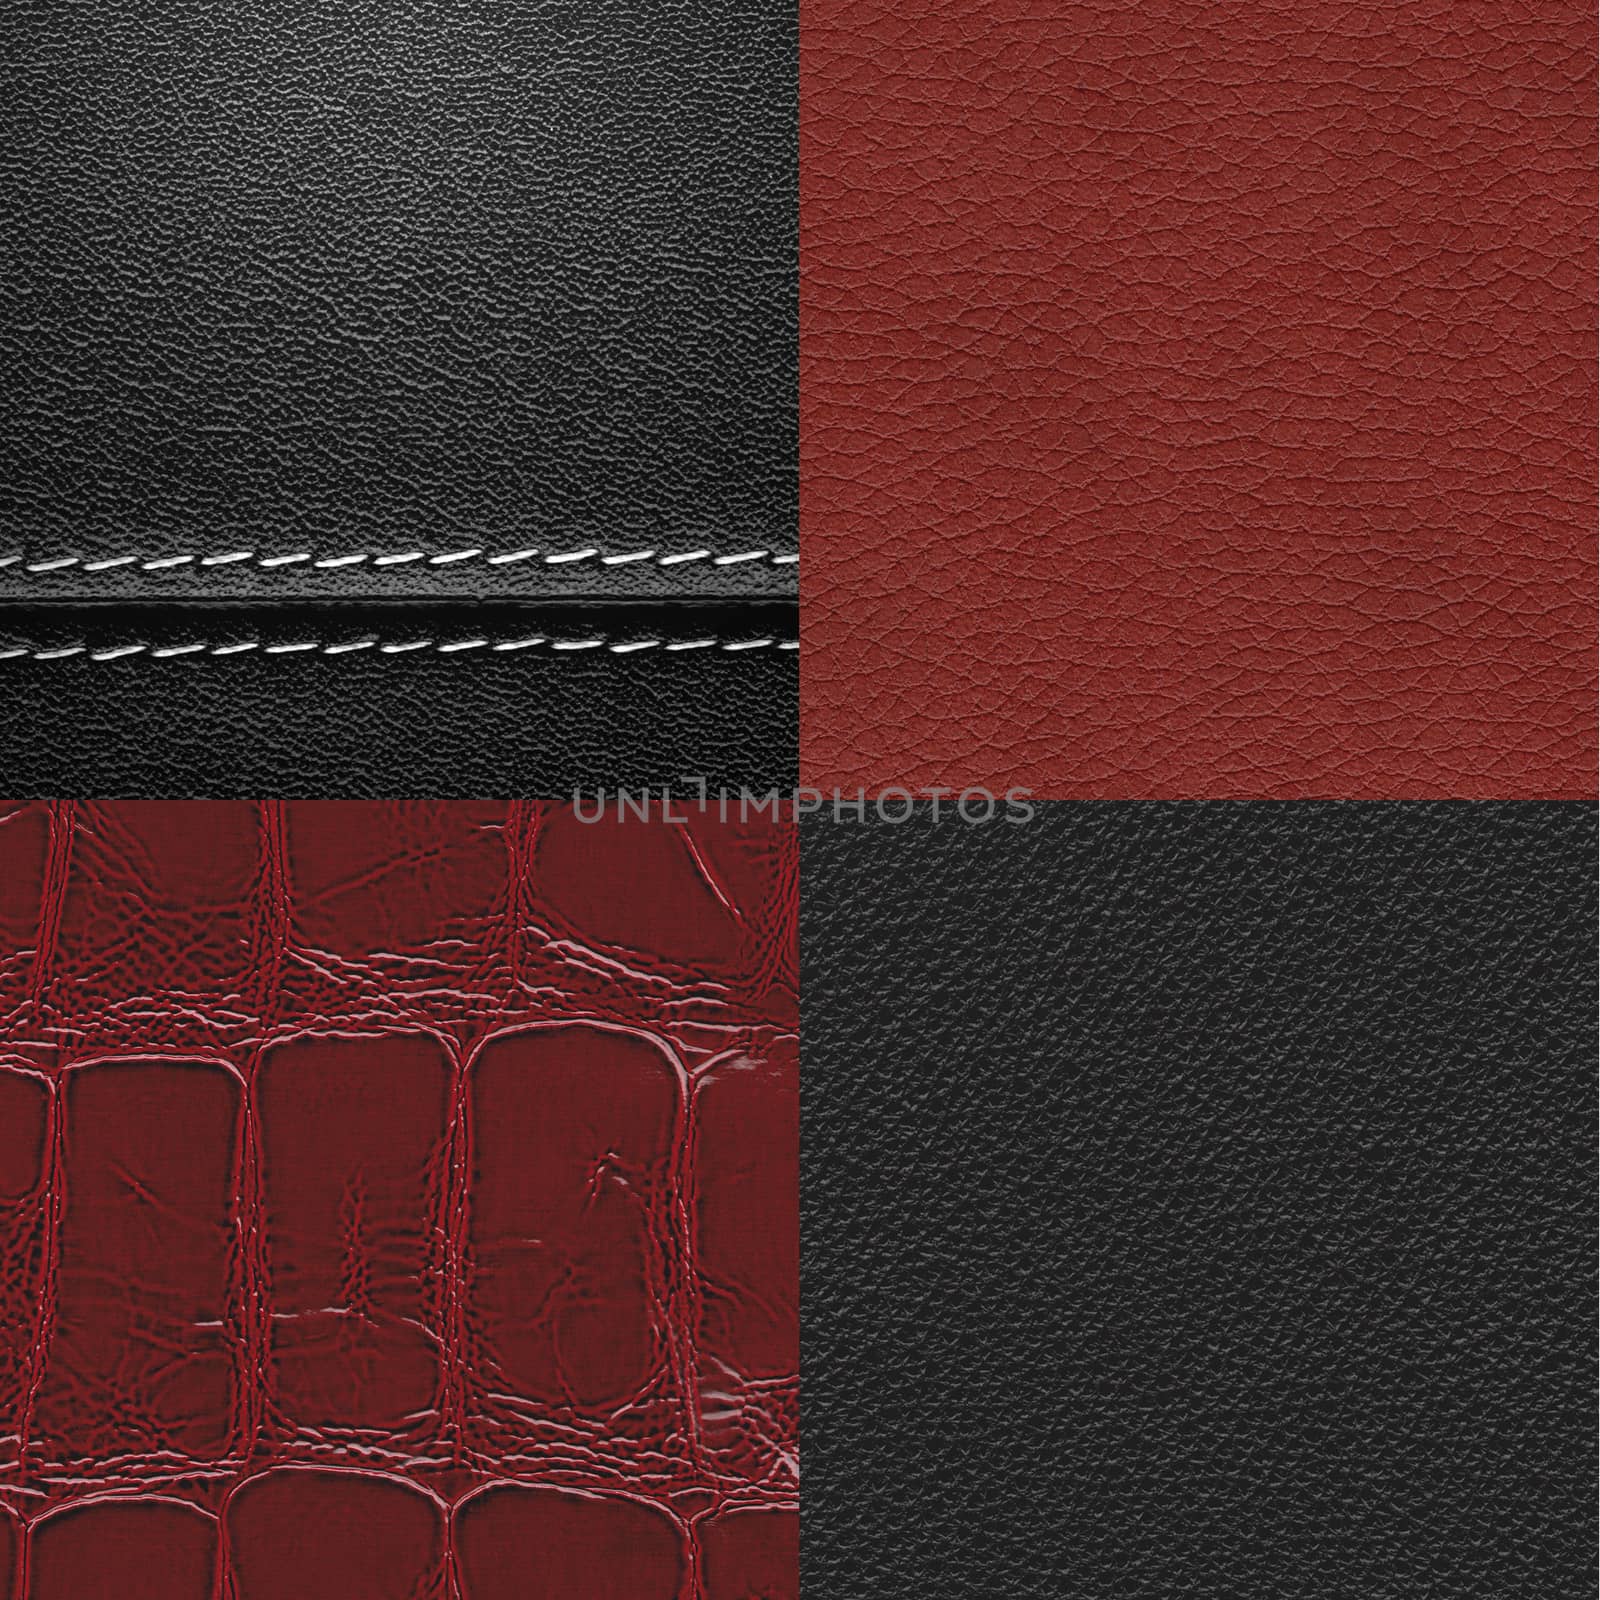 Leather backgrounds close-up set. Two black and two dark red textures.